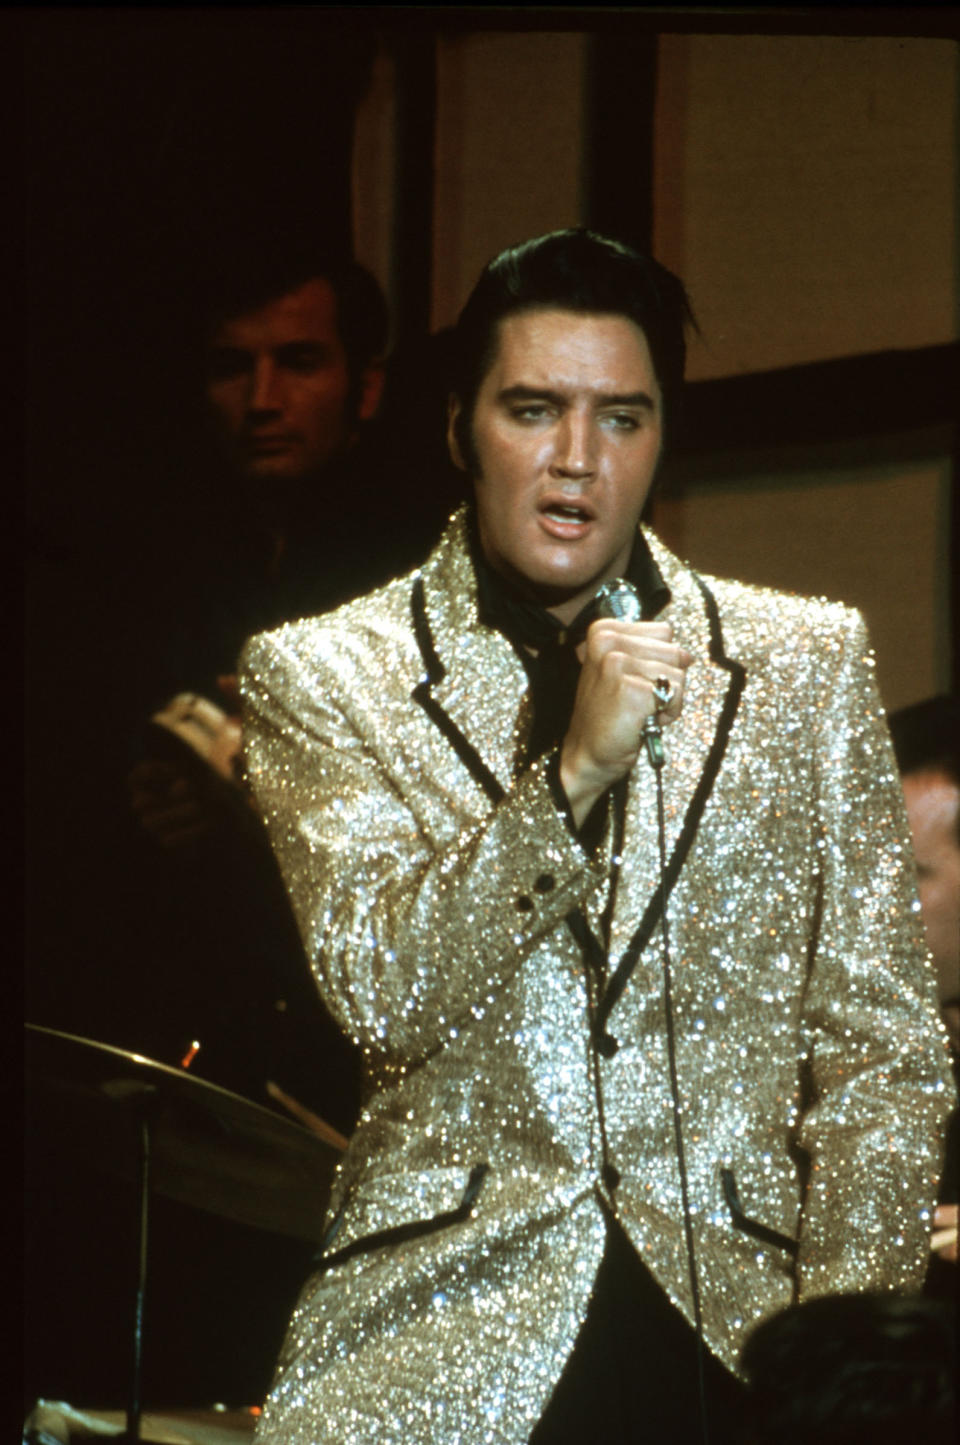 BURBANK, CA - JUNE 27: Rock and roll musician Elvis Presley performing the song "Trouble" on the Elvis comeback TV special on June 27, 1968 in Burbank, California. (Photo by Michael Ochs Archives/Getty Images)